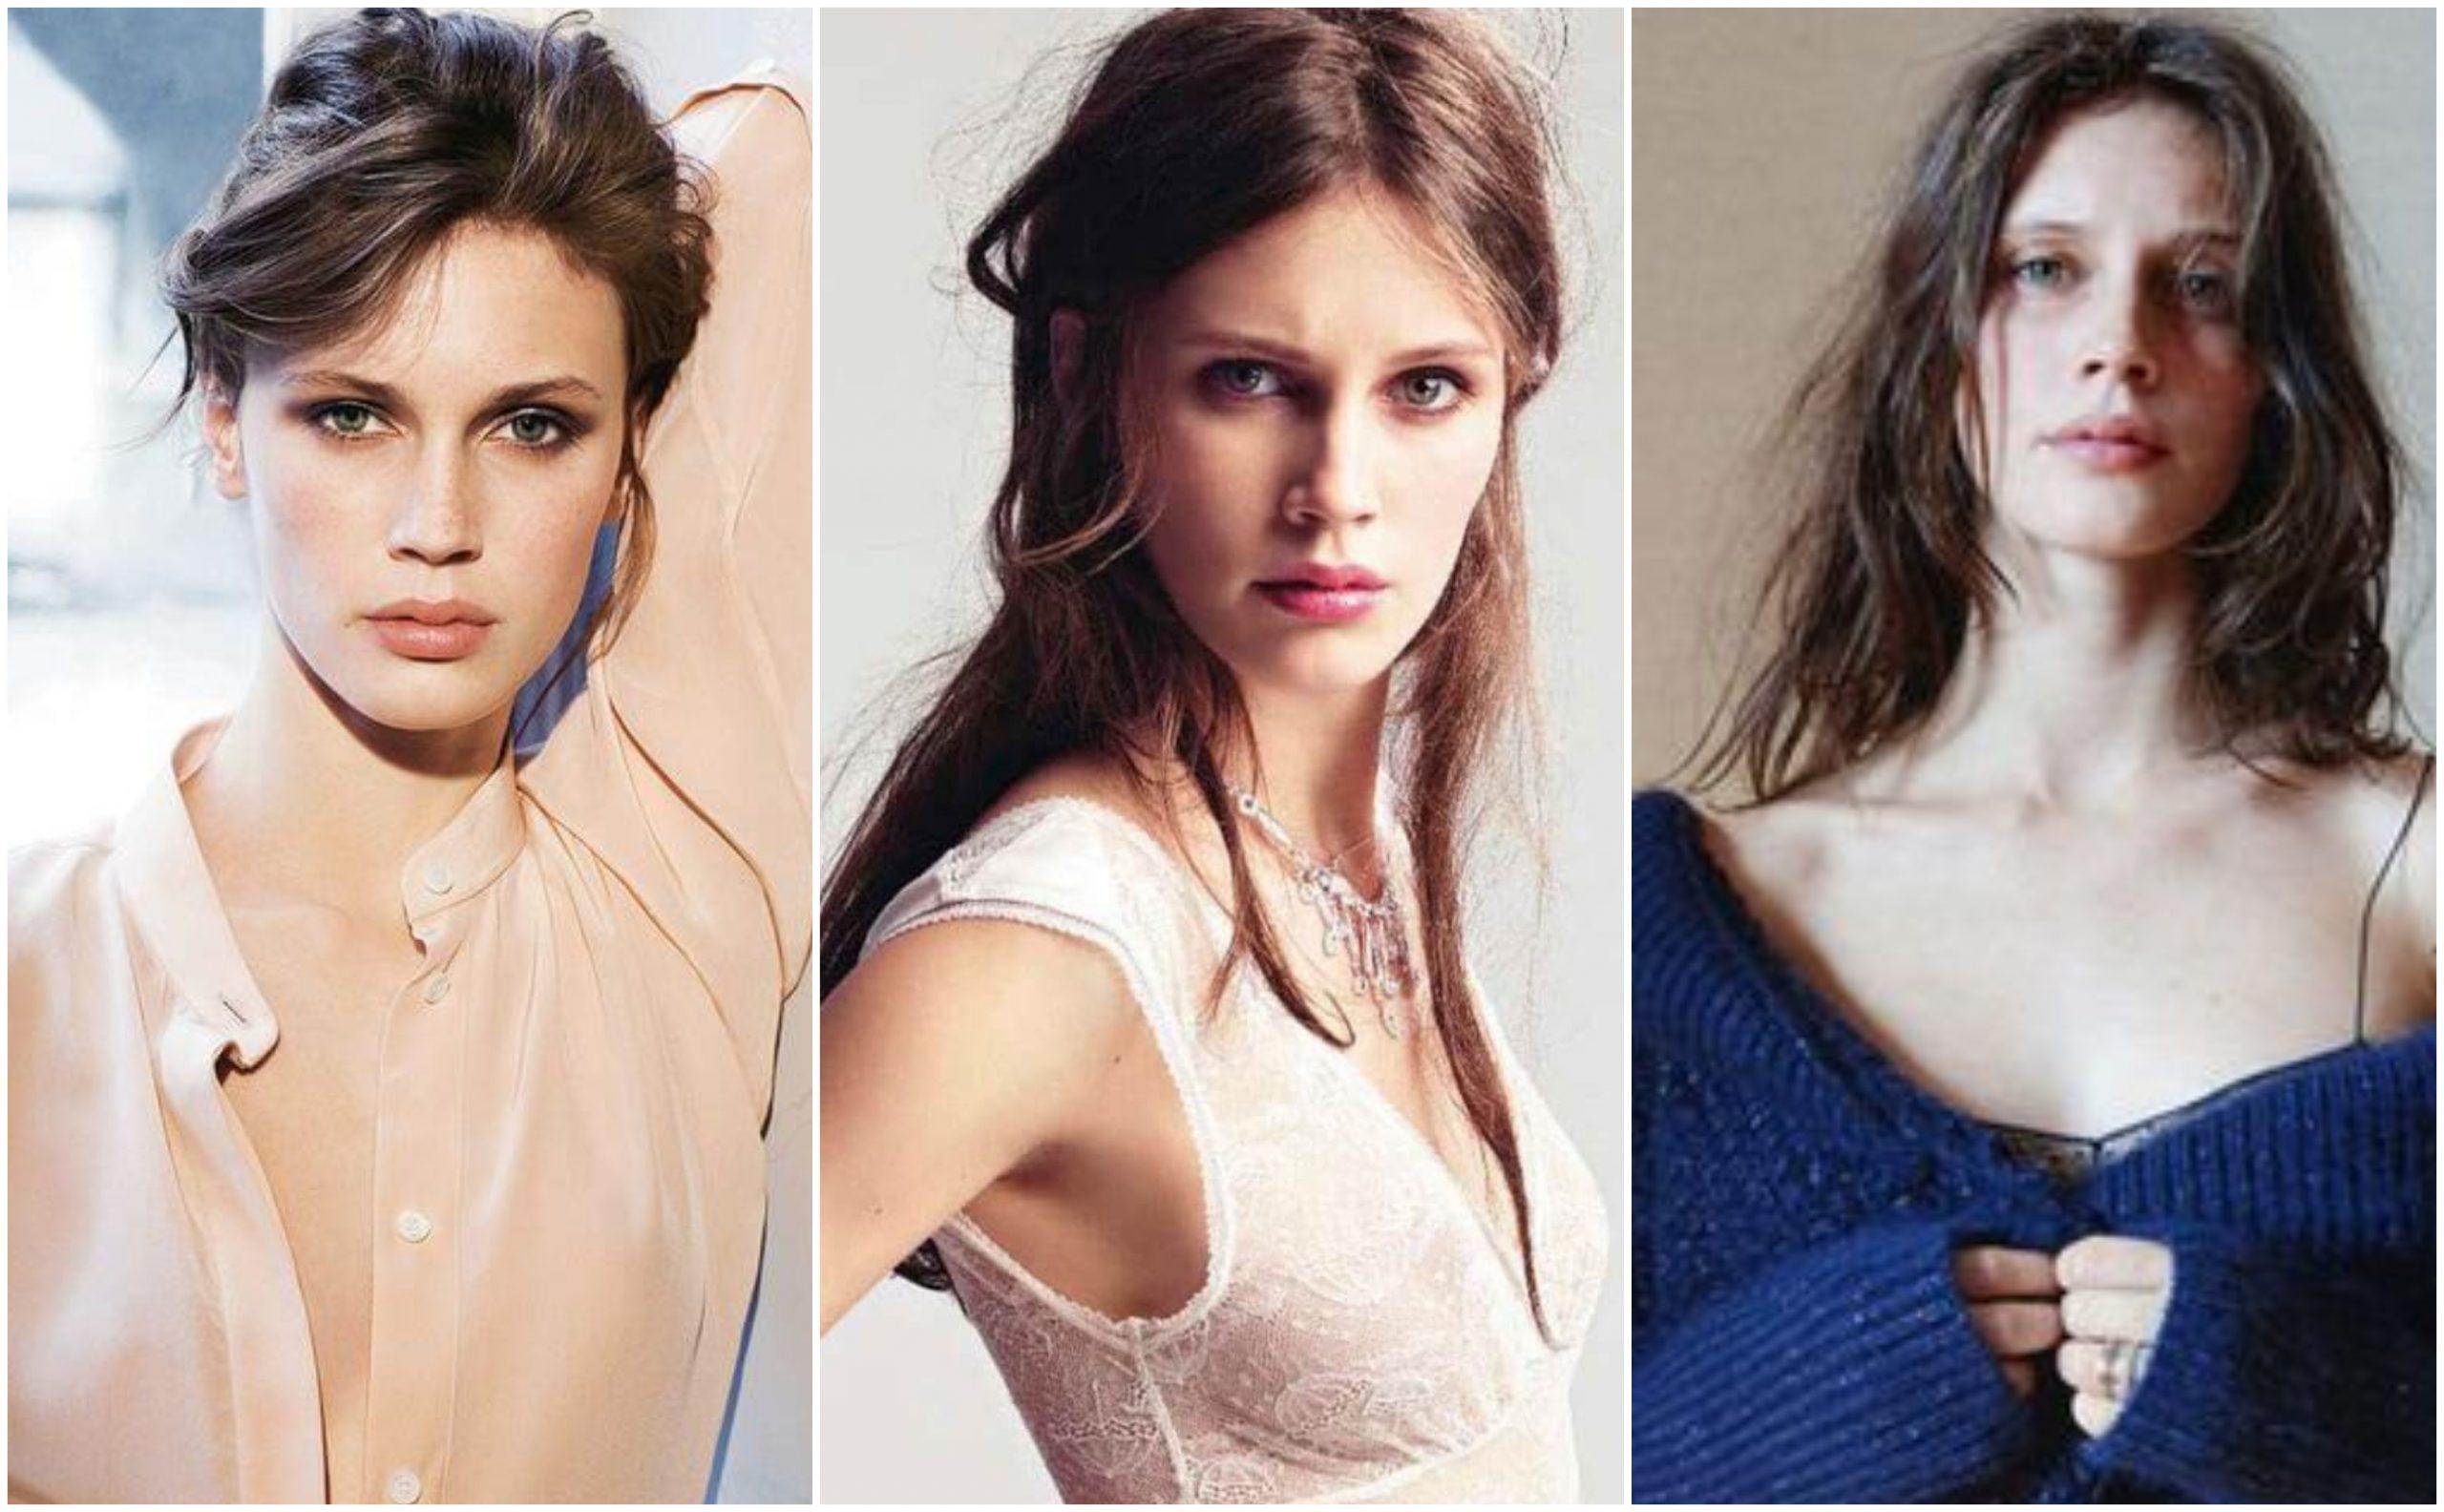 52 Hot Pictures Of Marine Vacth That Are Absolute Scorchers